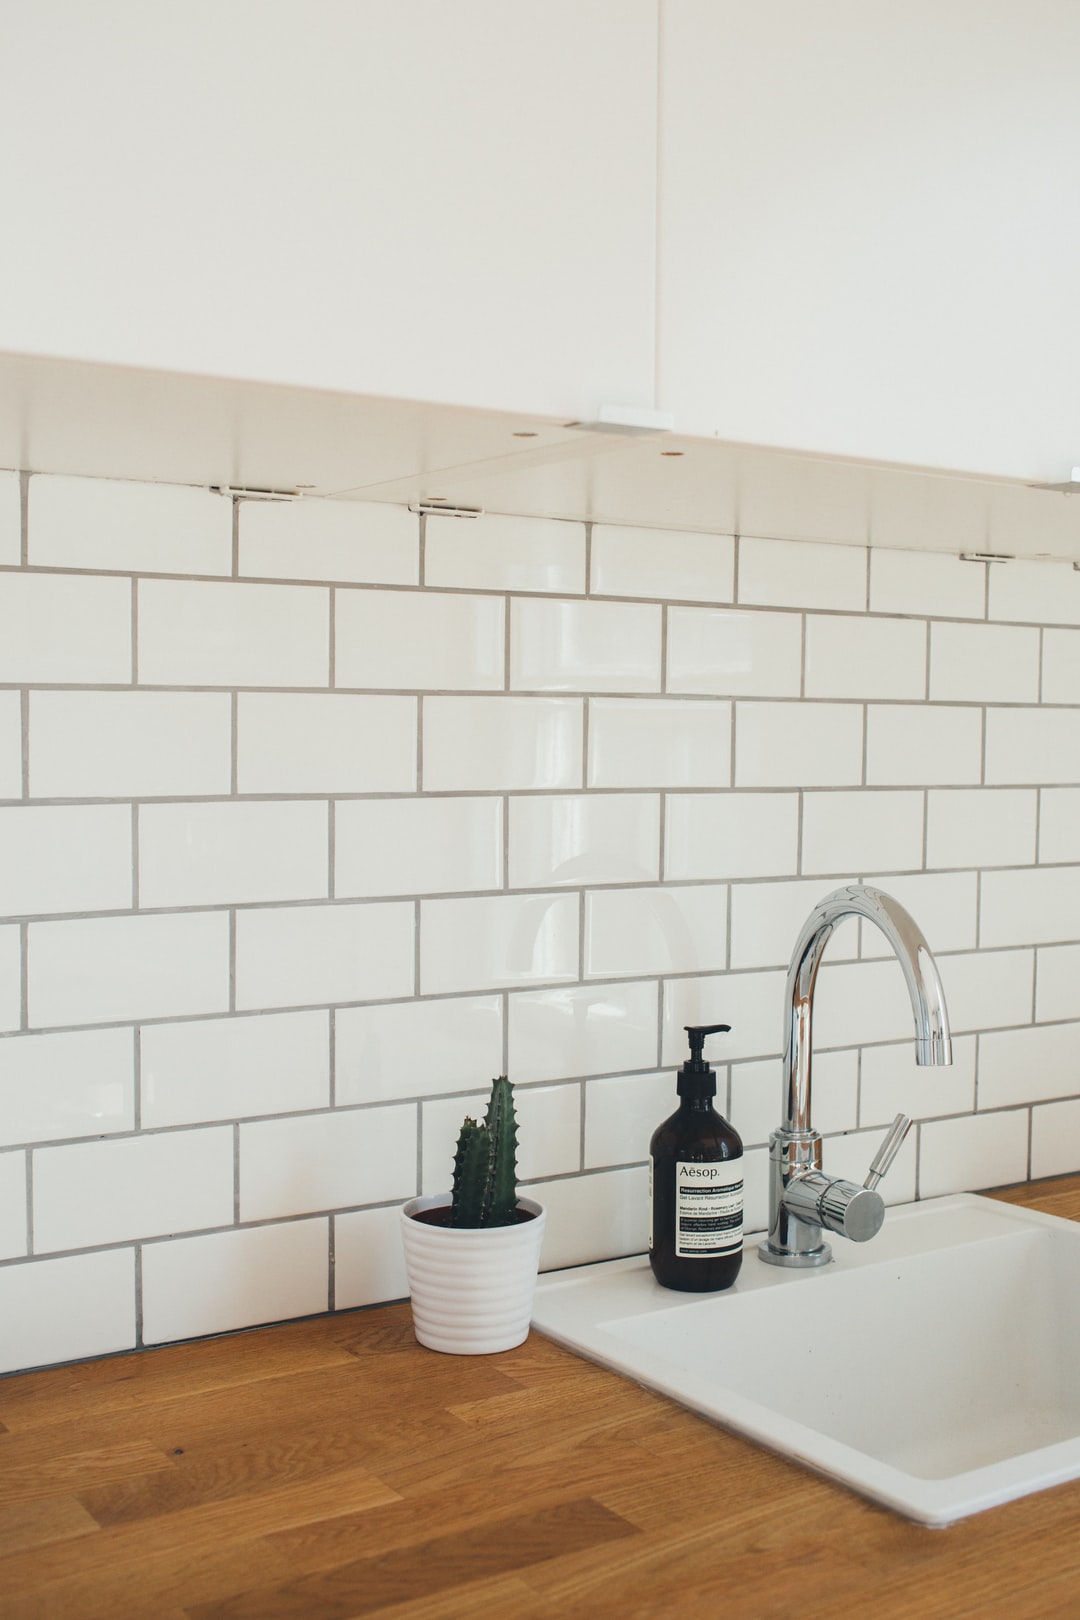 Grout with white tiles